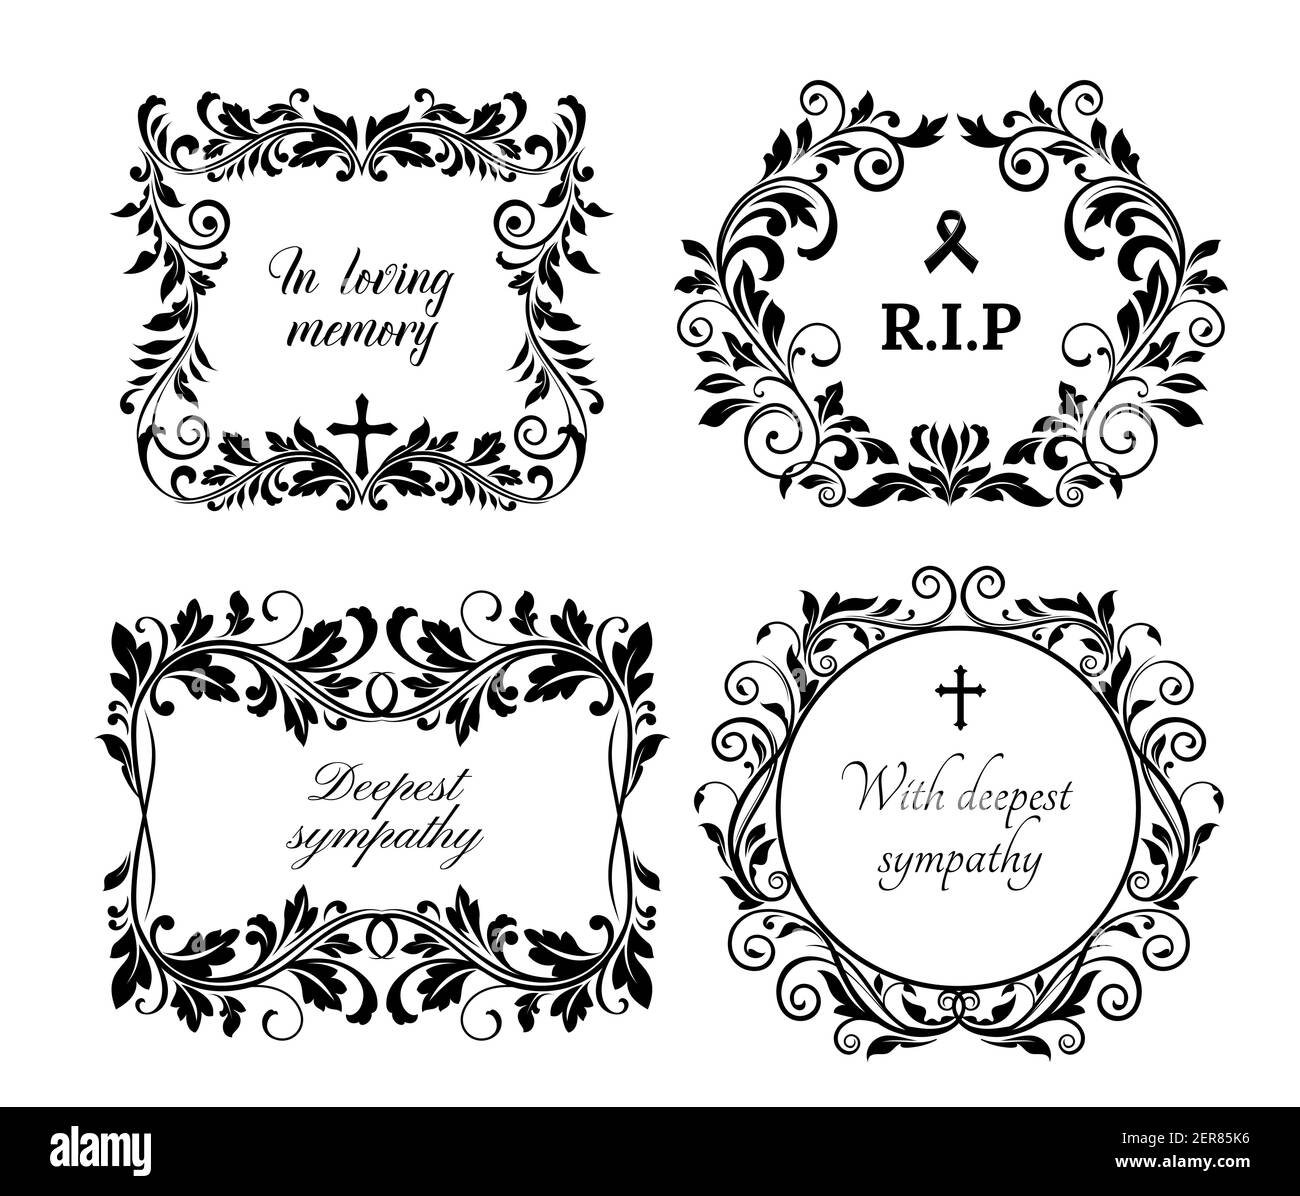 Funeral memory and condolences cards for obituary and death grief black banner, vector floral wreath. Funeral black flowers, In loving memory and RIP Stock Vector